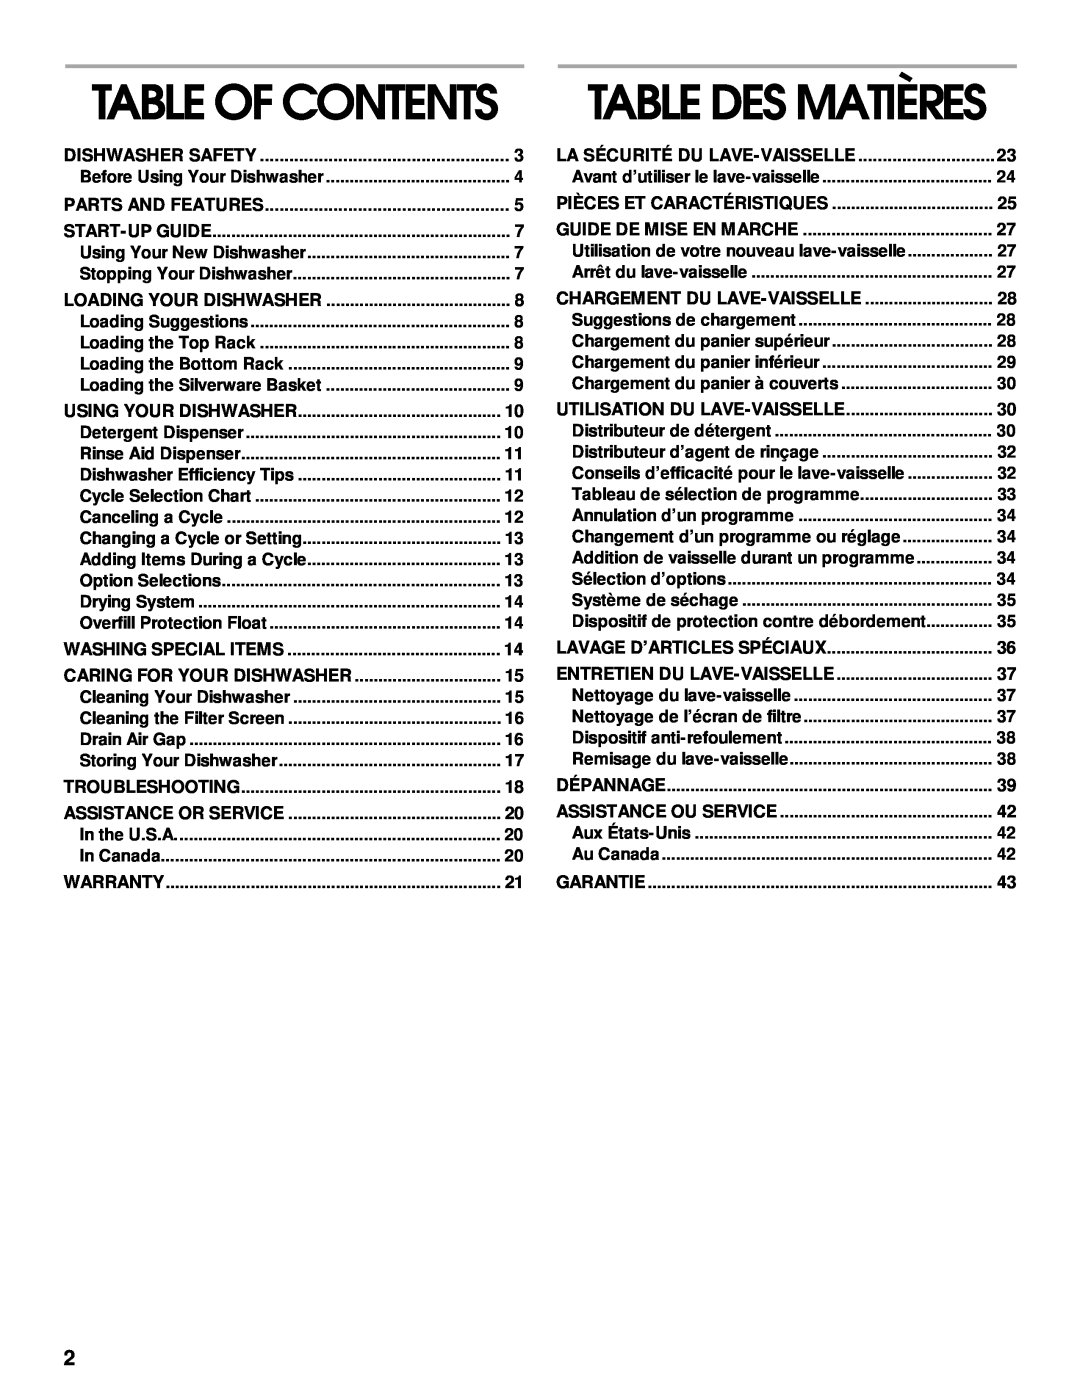 Whirlpool TUD5700, TUD400 manual Table Of Contents, Table Des Matières 